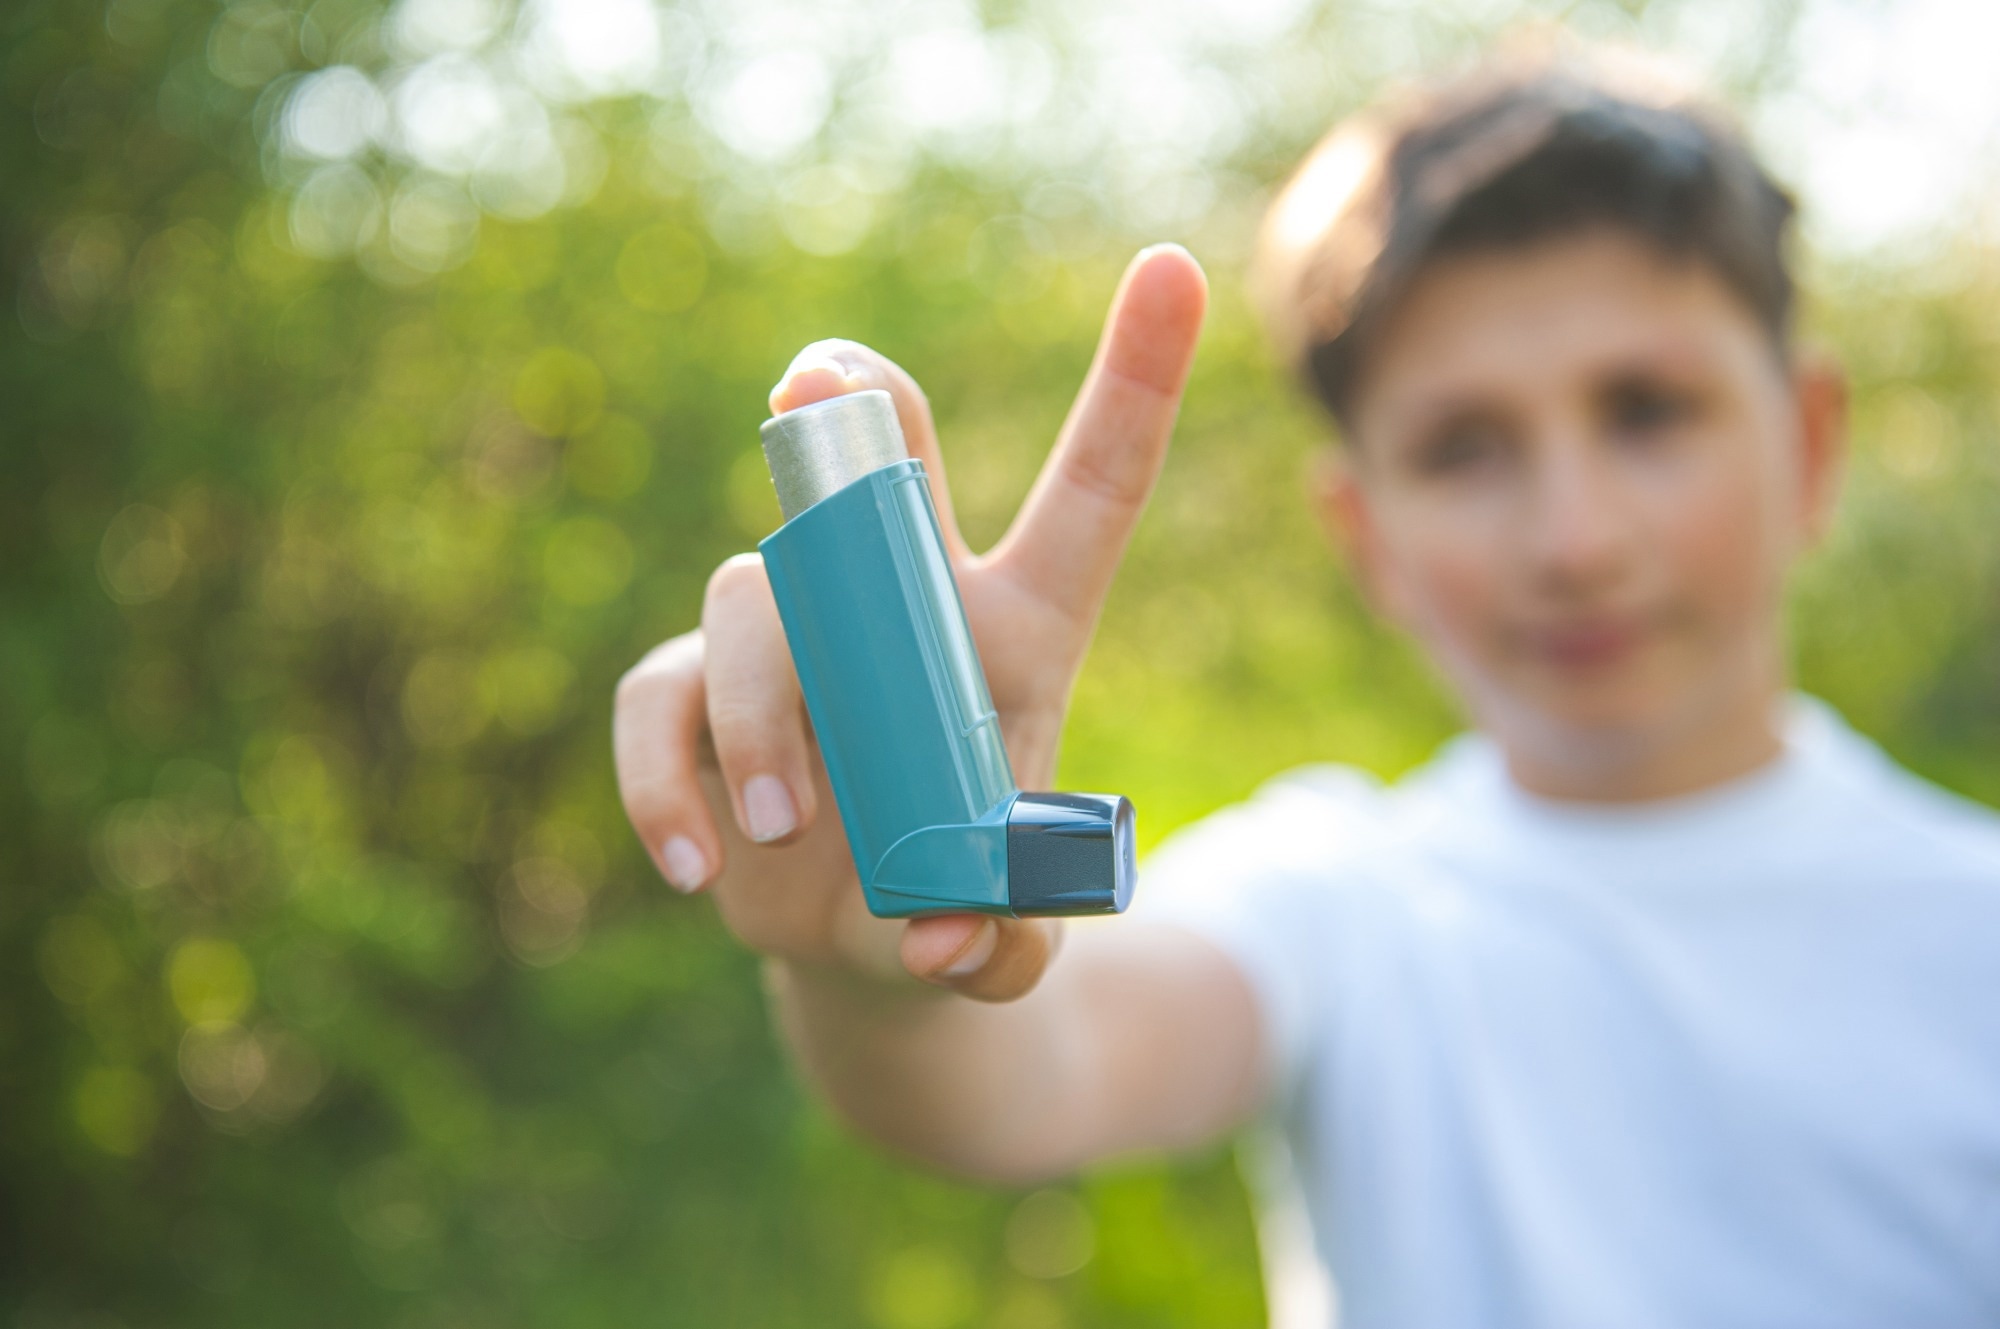 Study: Early life exposure to pollens and increased risks of childhood asthma: a prospective cohort study in Ontario children. Image Credit: Misha Arkhanhel/Shutterstock.com